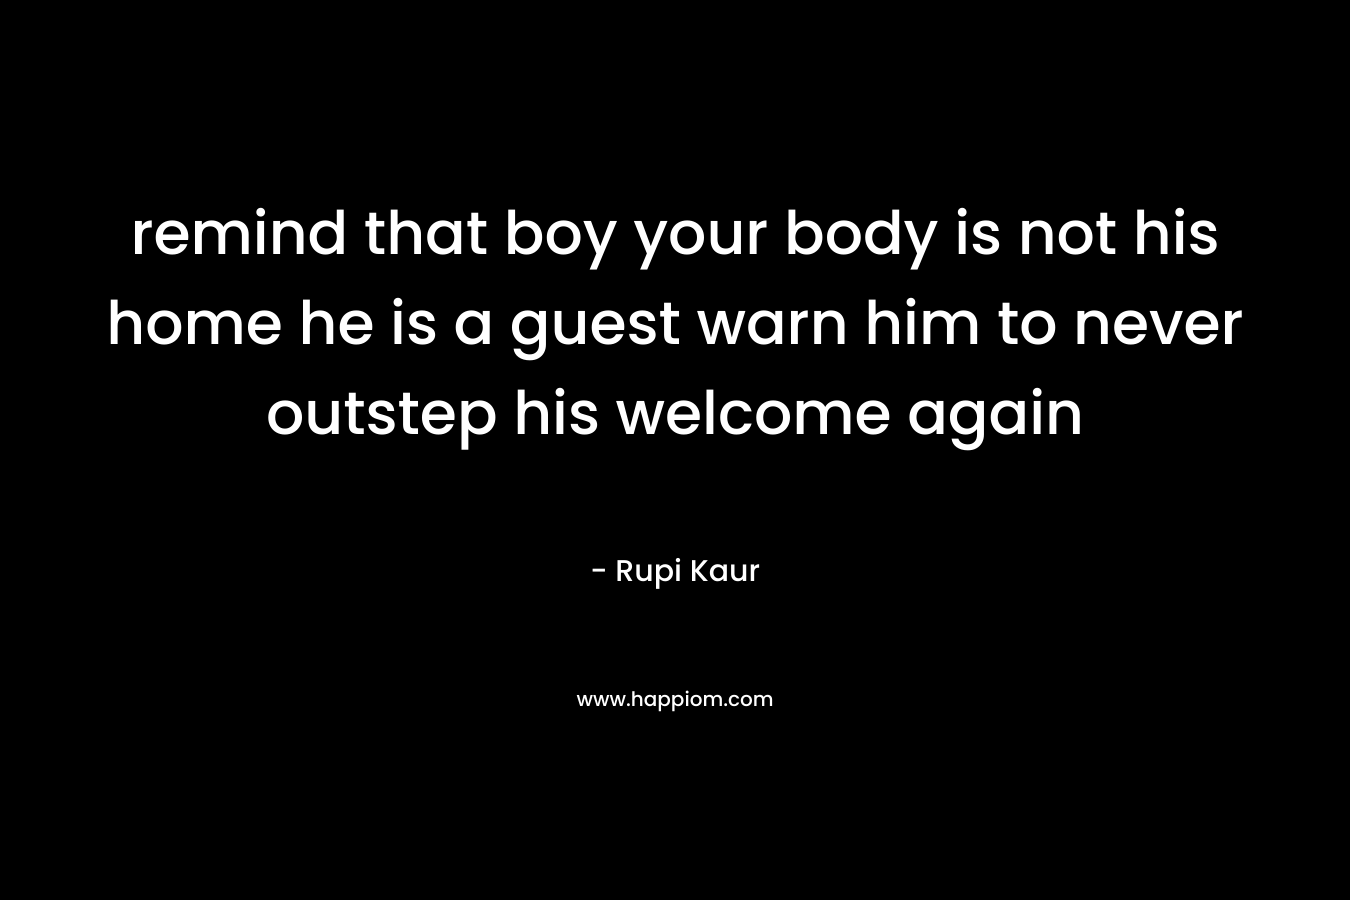 remind that boy your body is not his home he is a guest warn him to never outstep his welcome again – Rupi Kaur